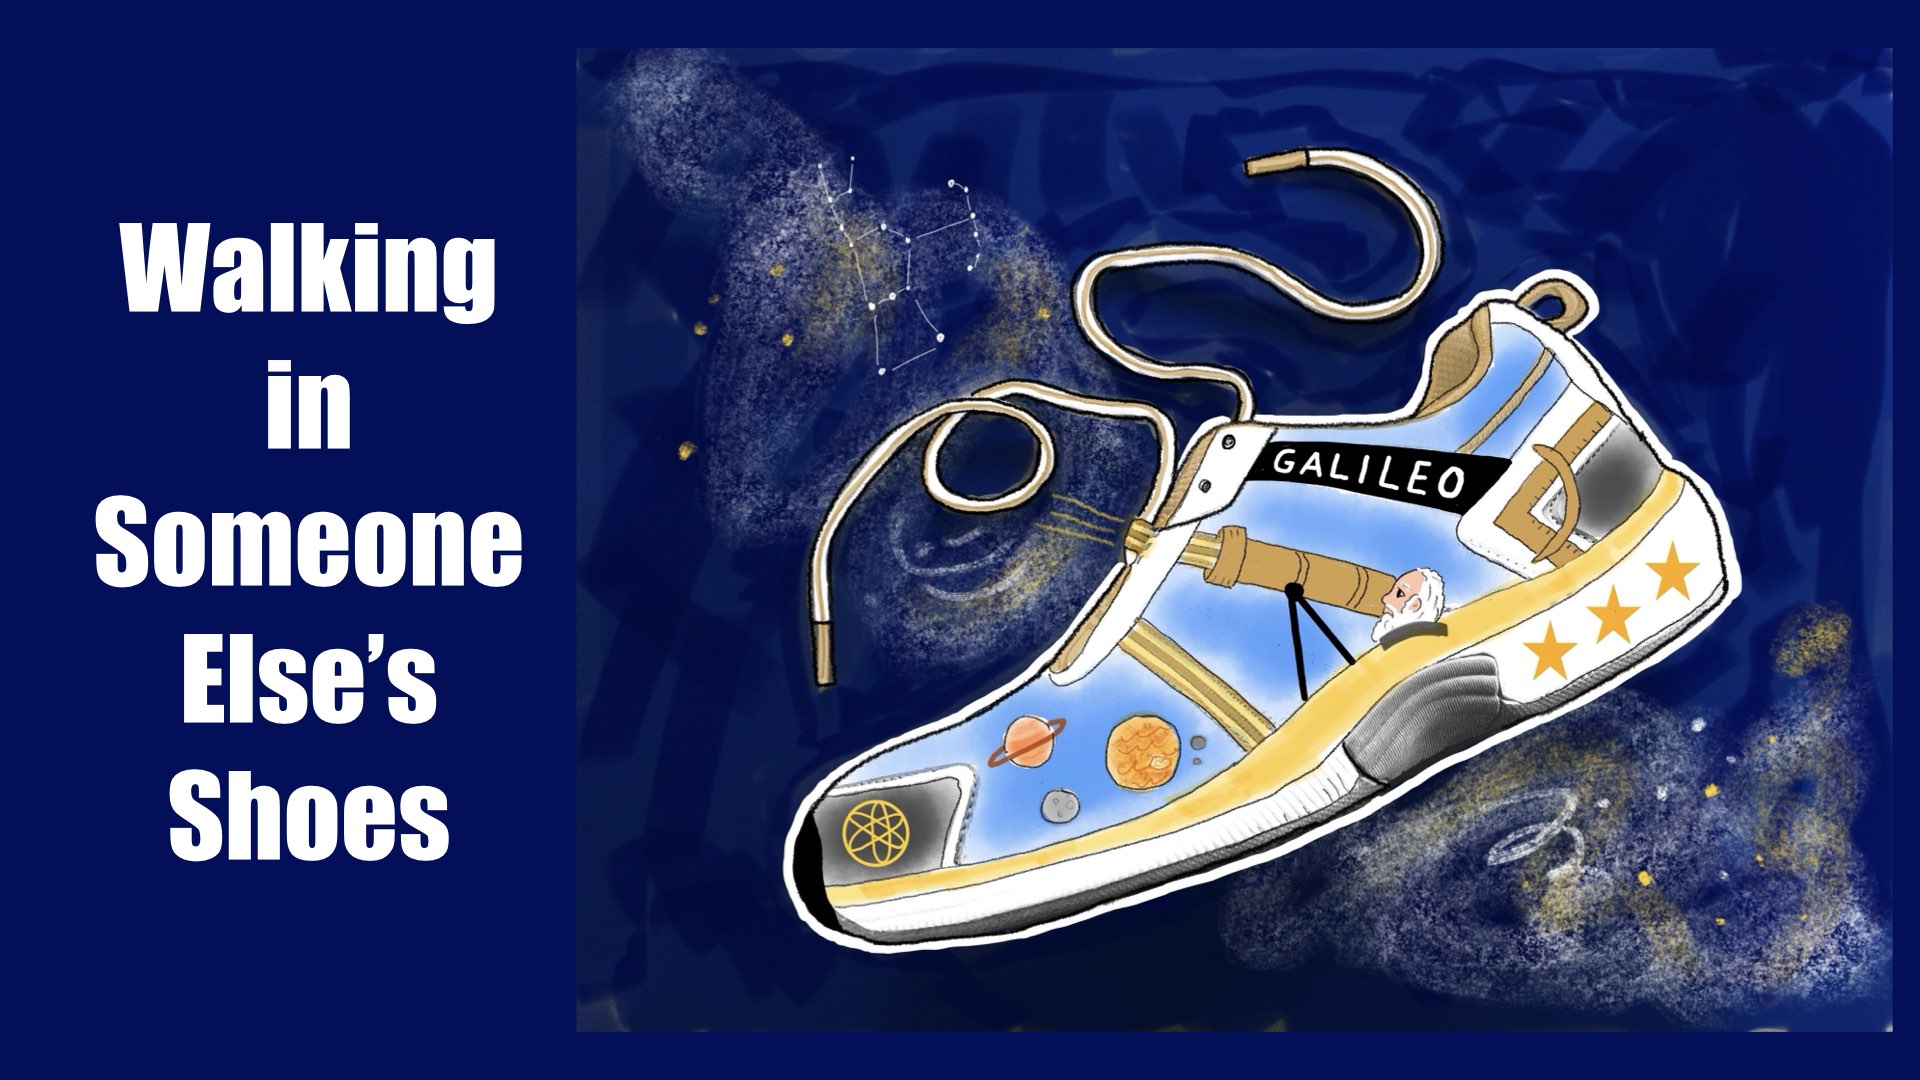 "Walking in Someone Else's Shoes" title with a white athletic shoe decorated with symbols to represent Galileo.